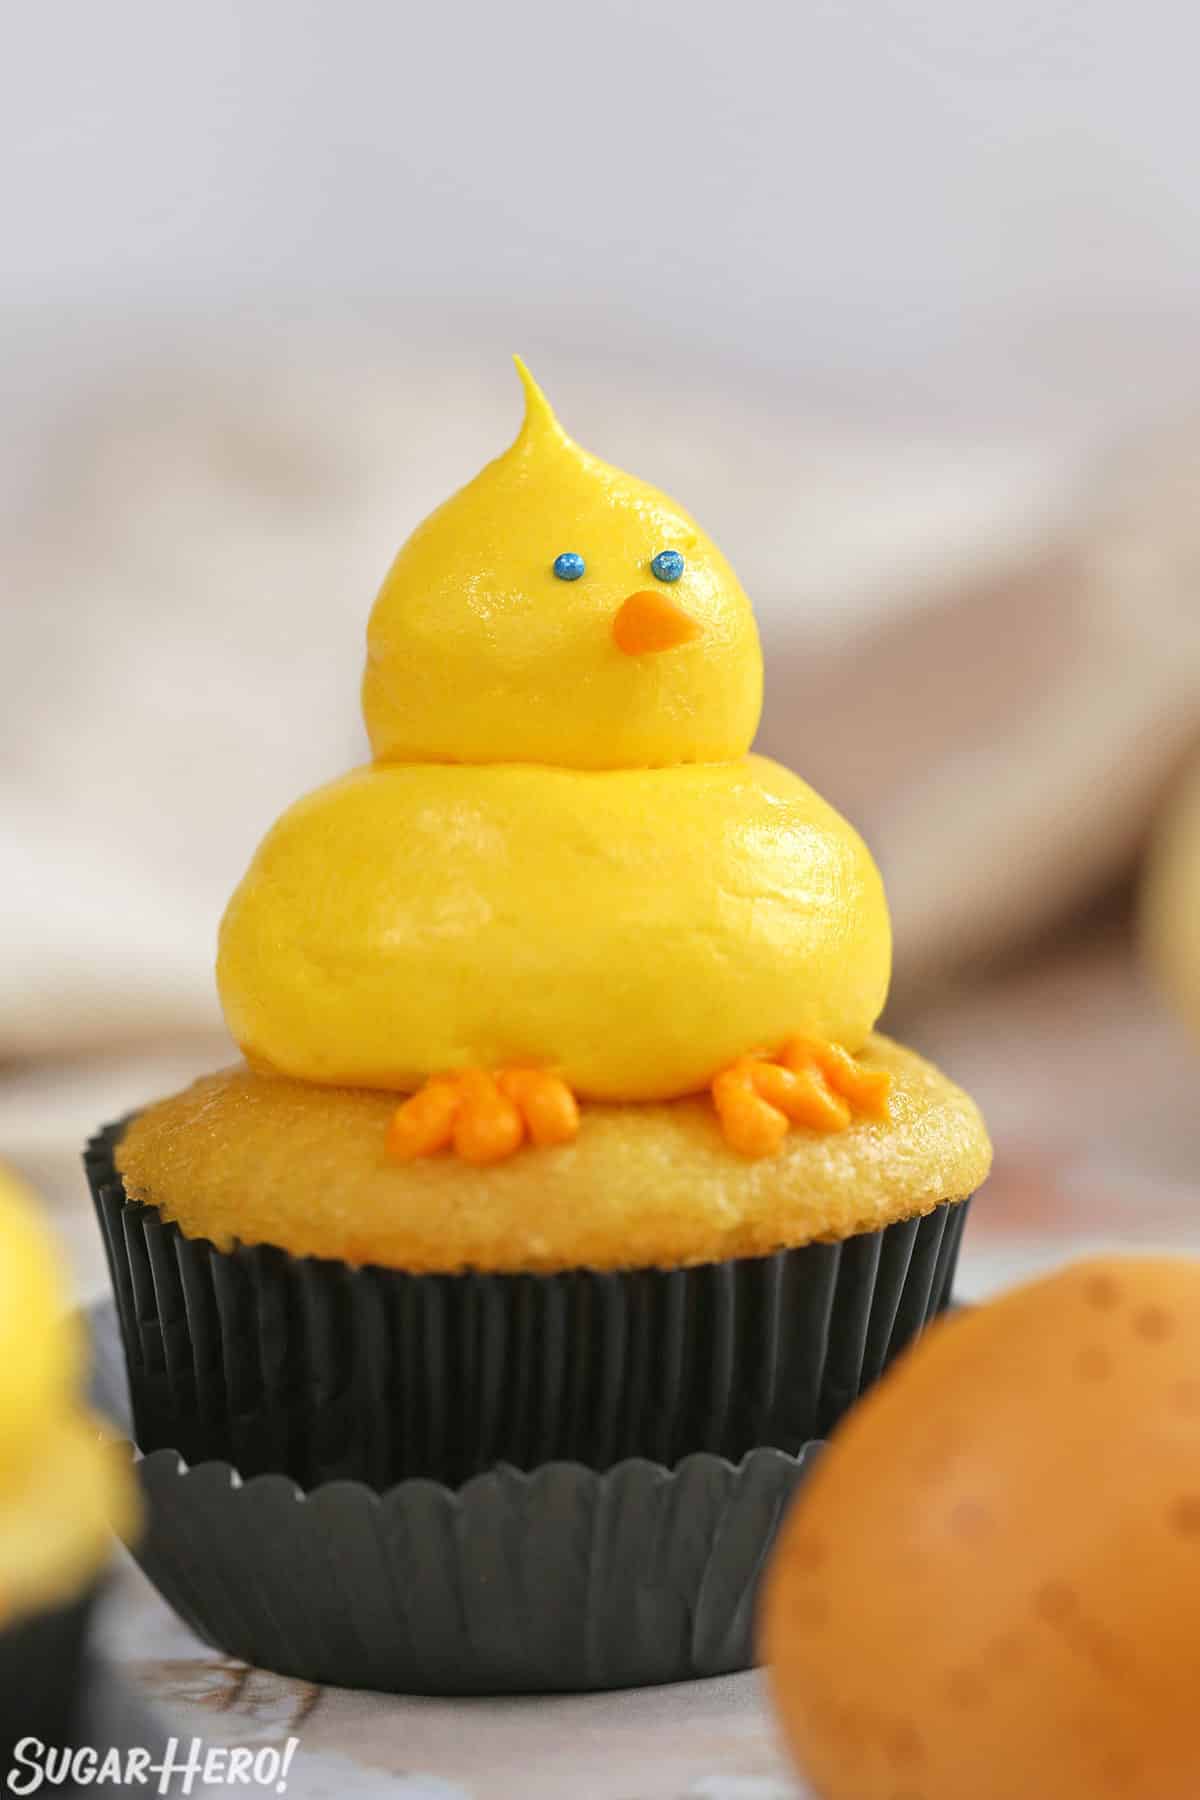 Side view close up of a Baby Chick Cupcake with a brown egg in the foreground.